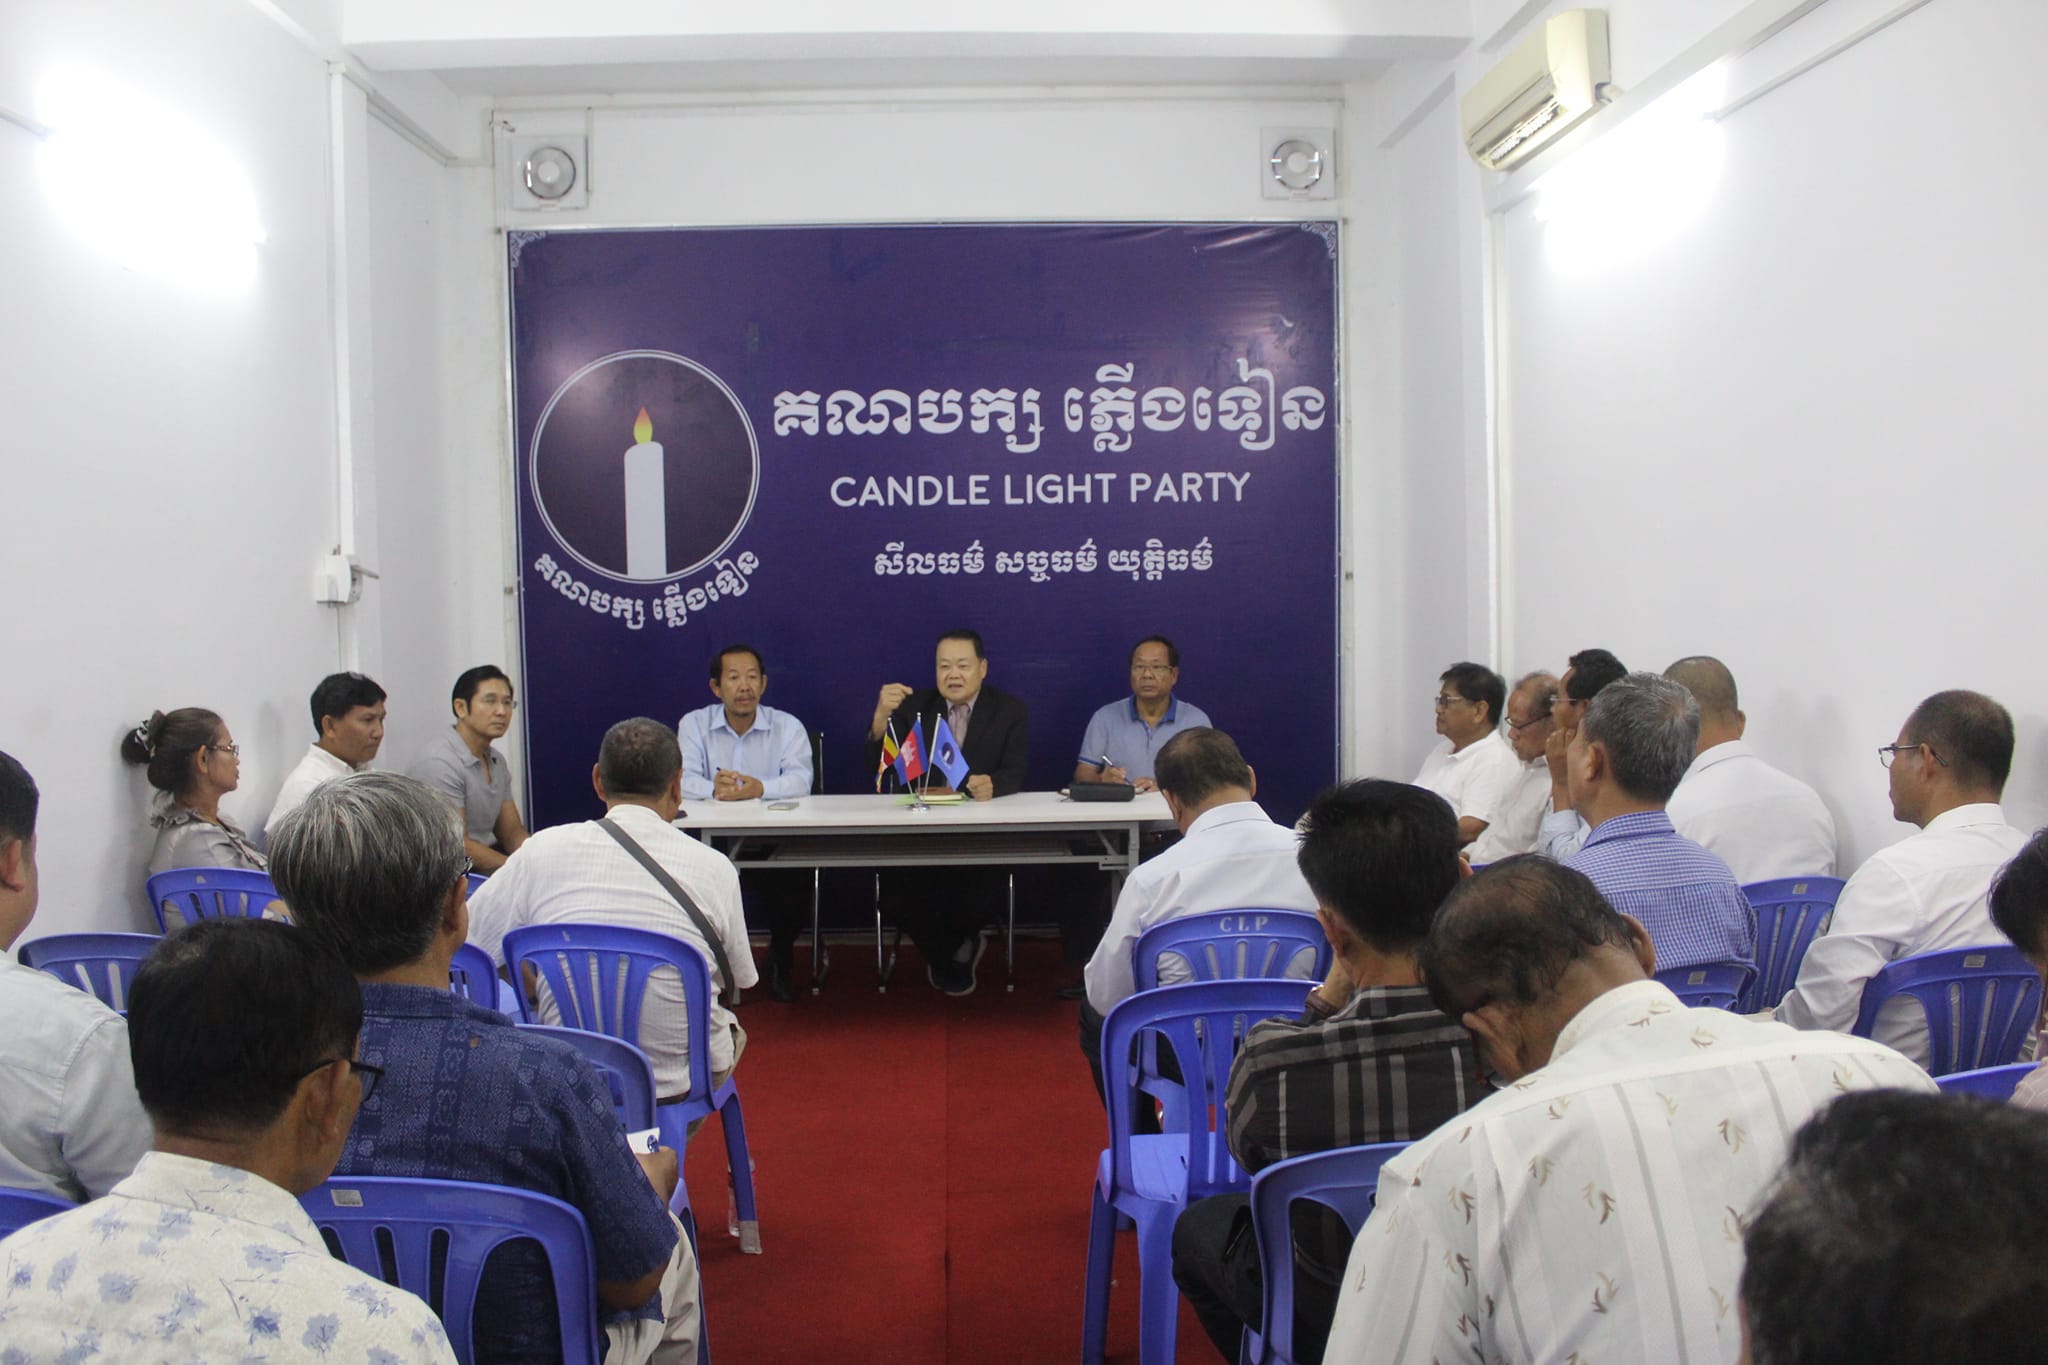 Candleligth parti politique Cambodge